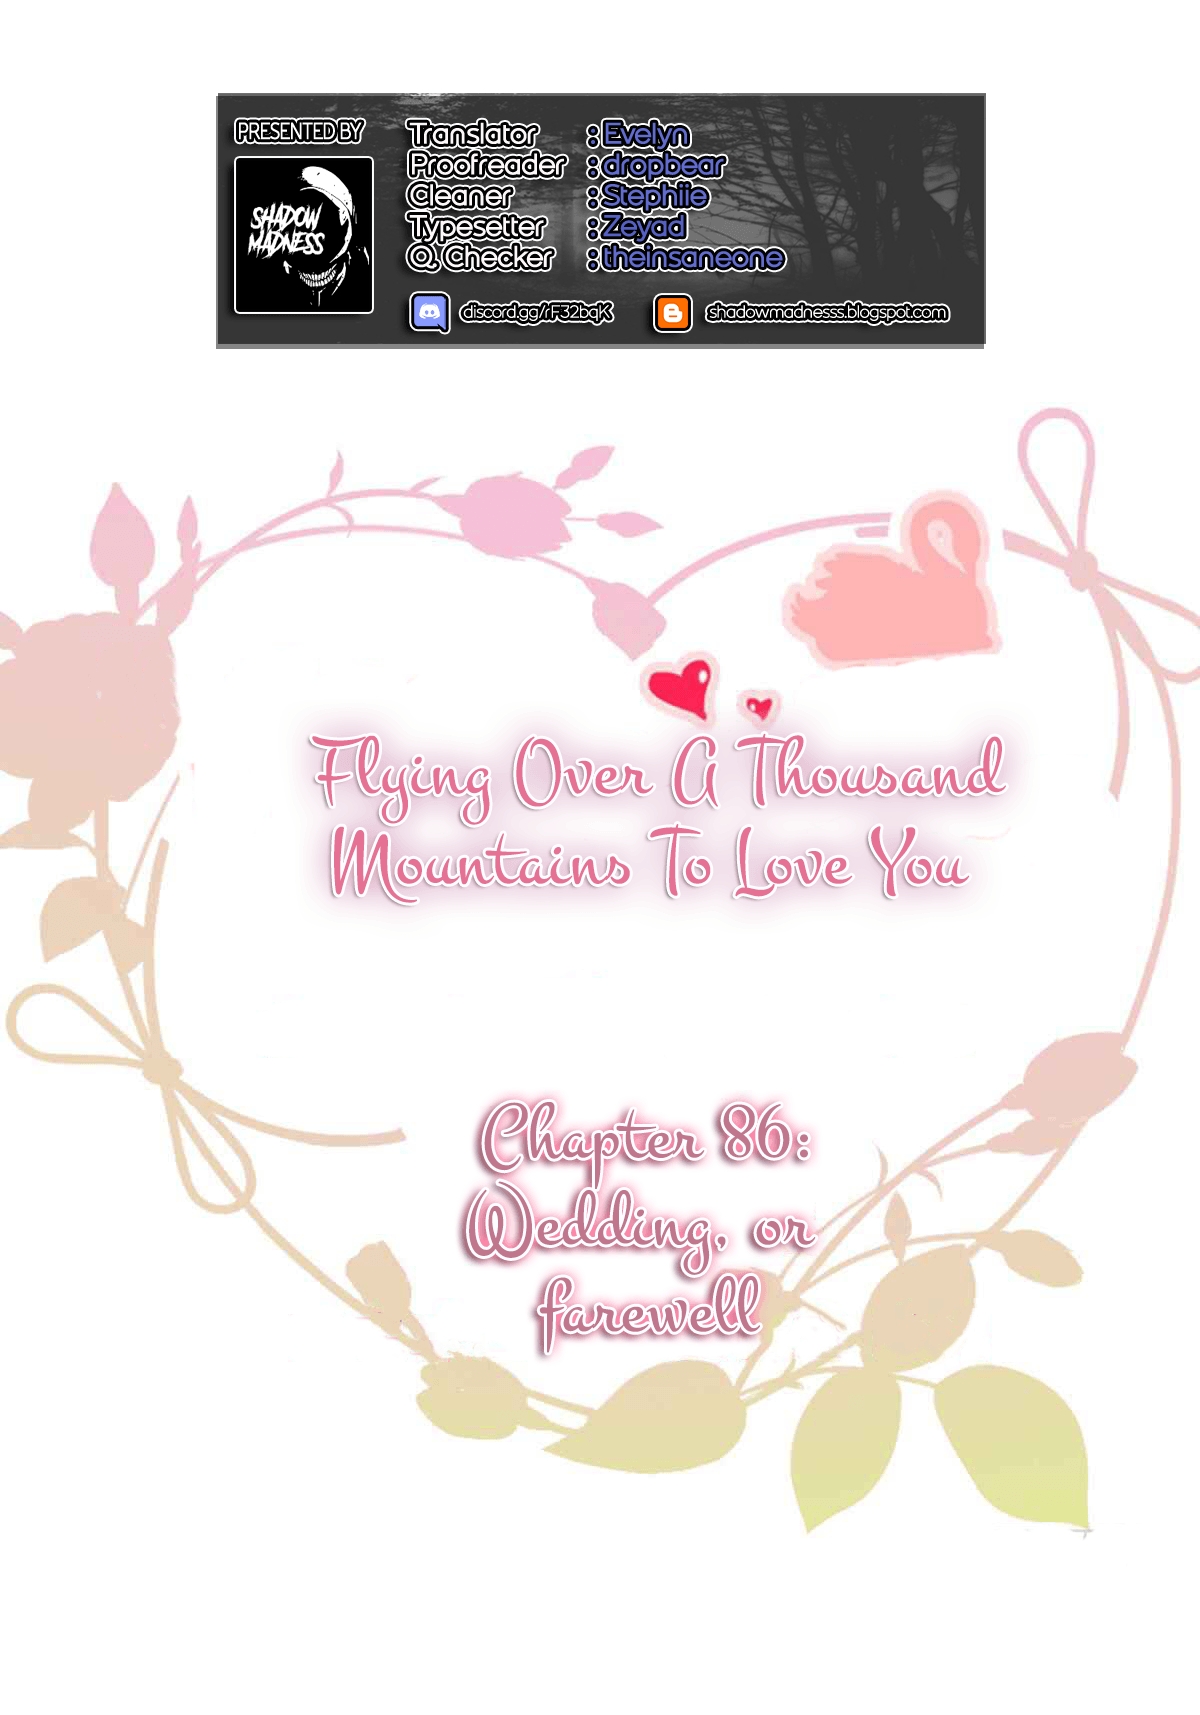 Flying Over a Thousand Mountains to Love You Ch. 86 Wedding, or farewell